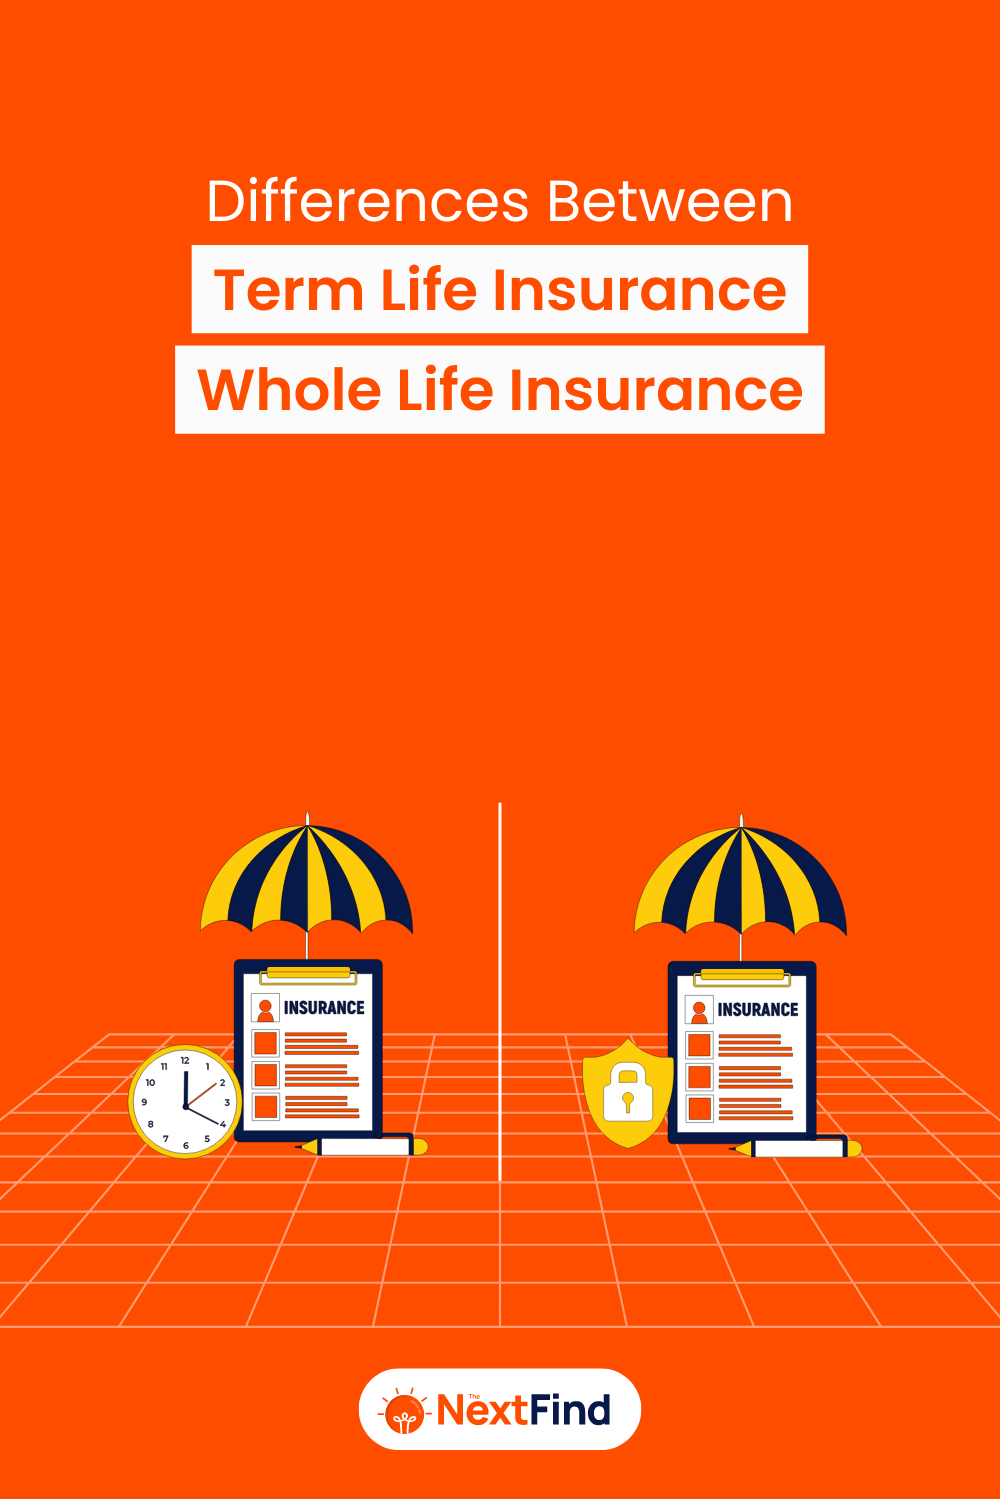 Differences Between Term Insurance And Whole Life Insurance